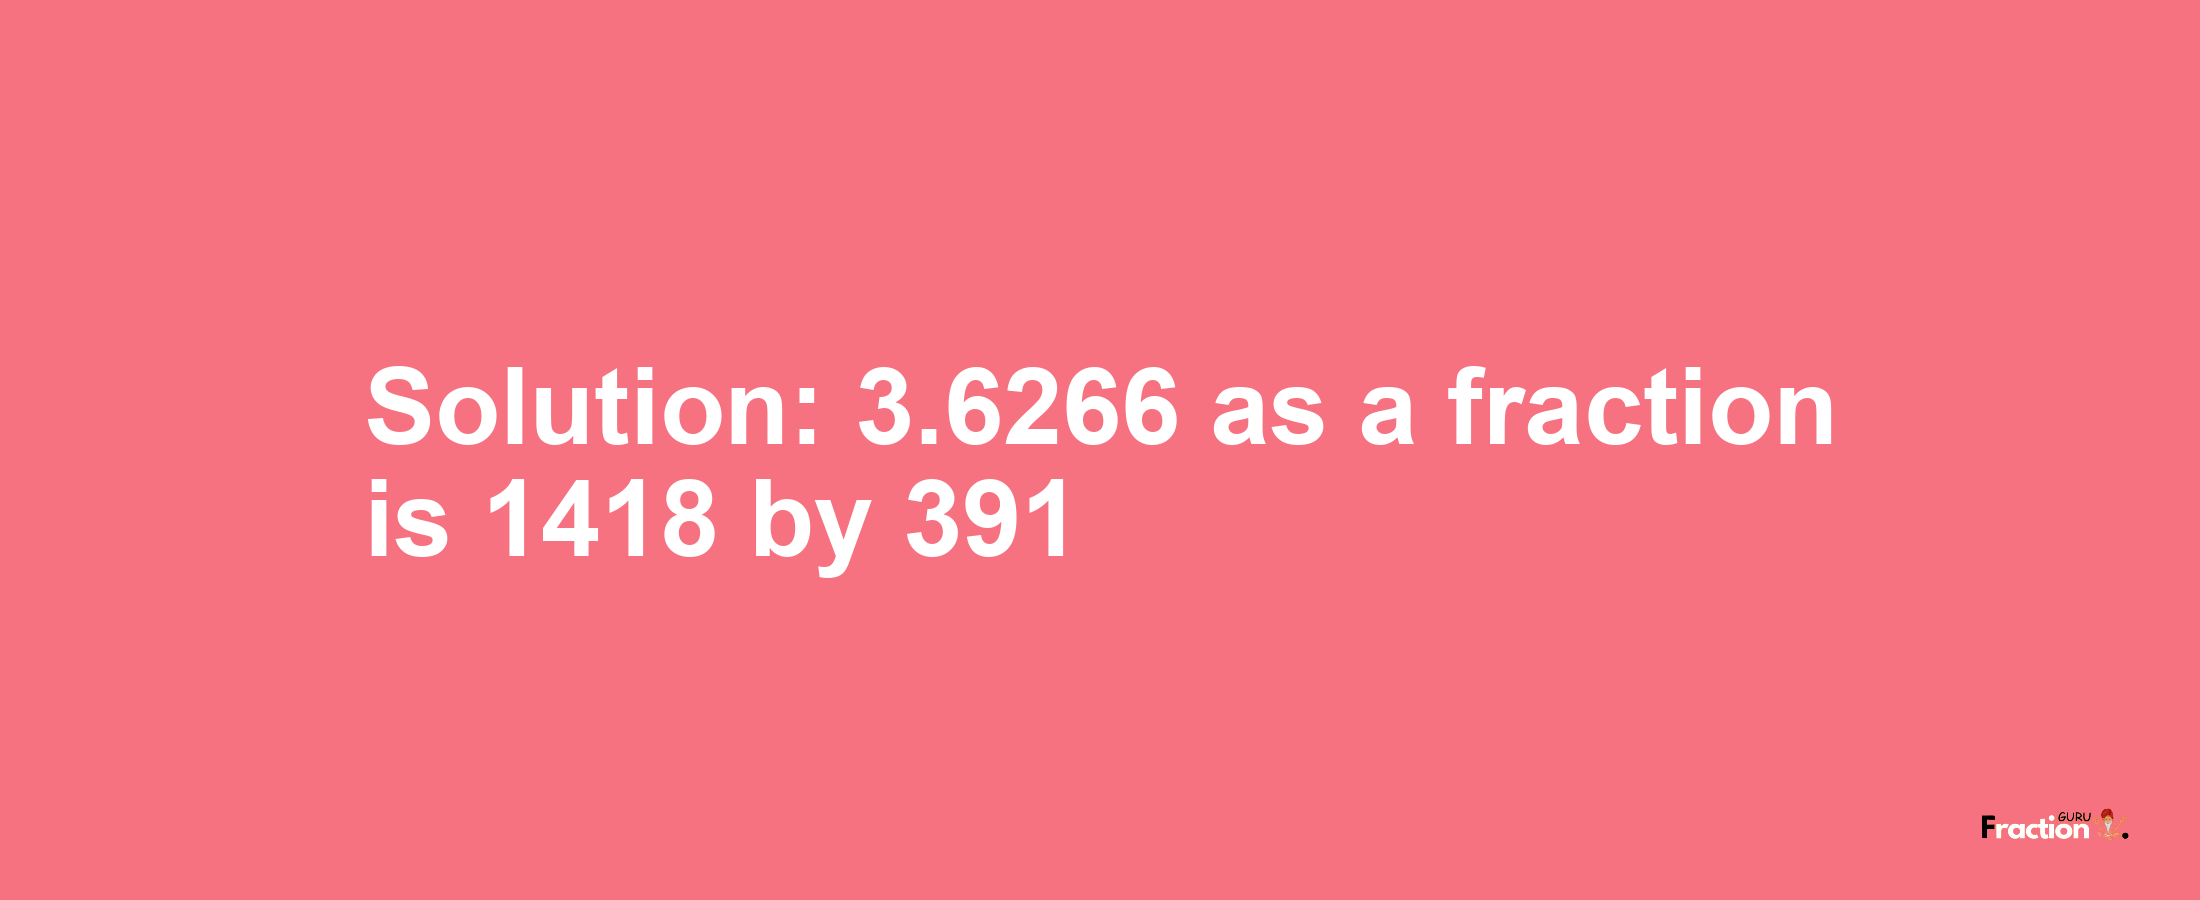 Solution:3.6266 as a fraction is 1418/391